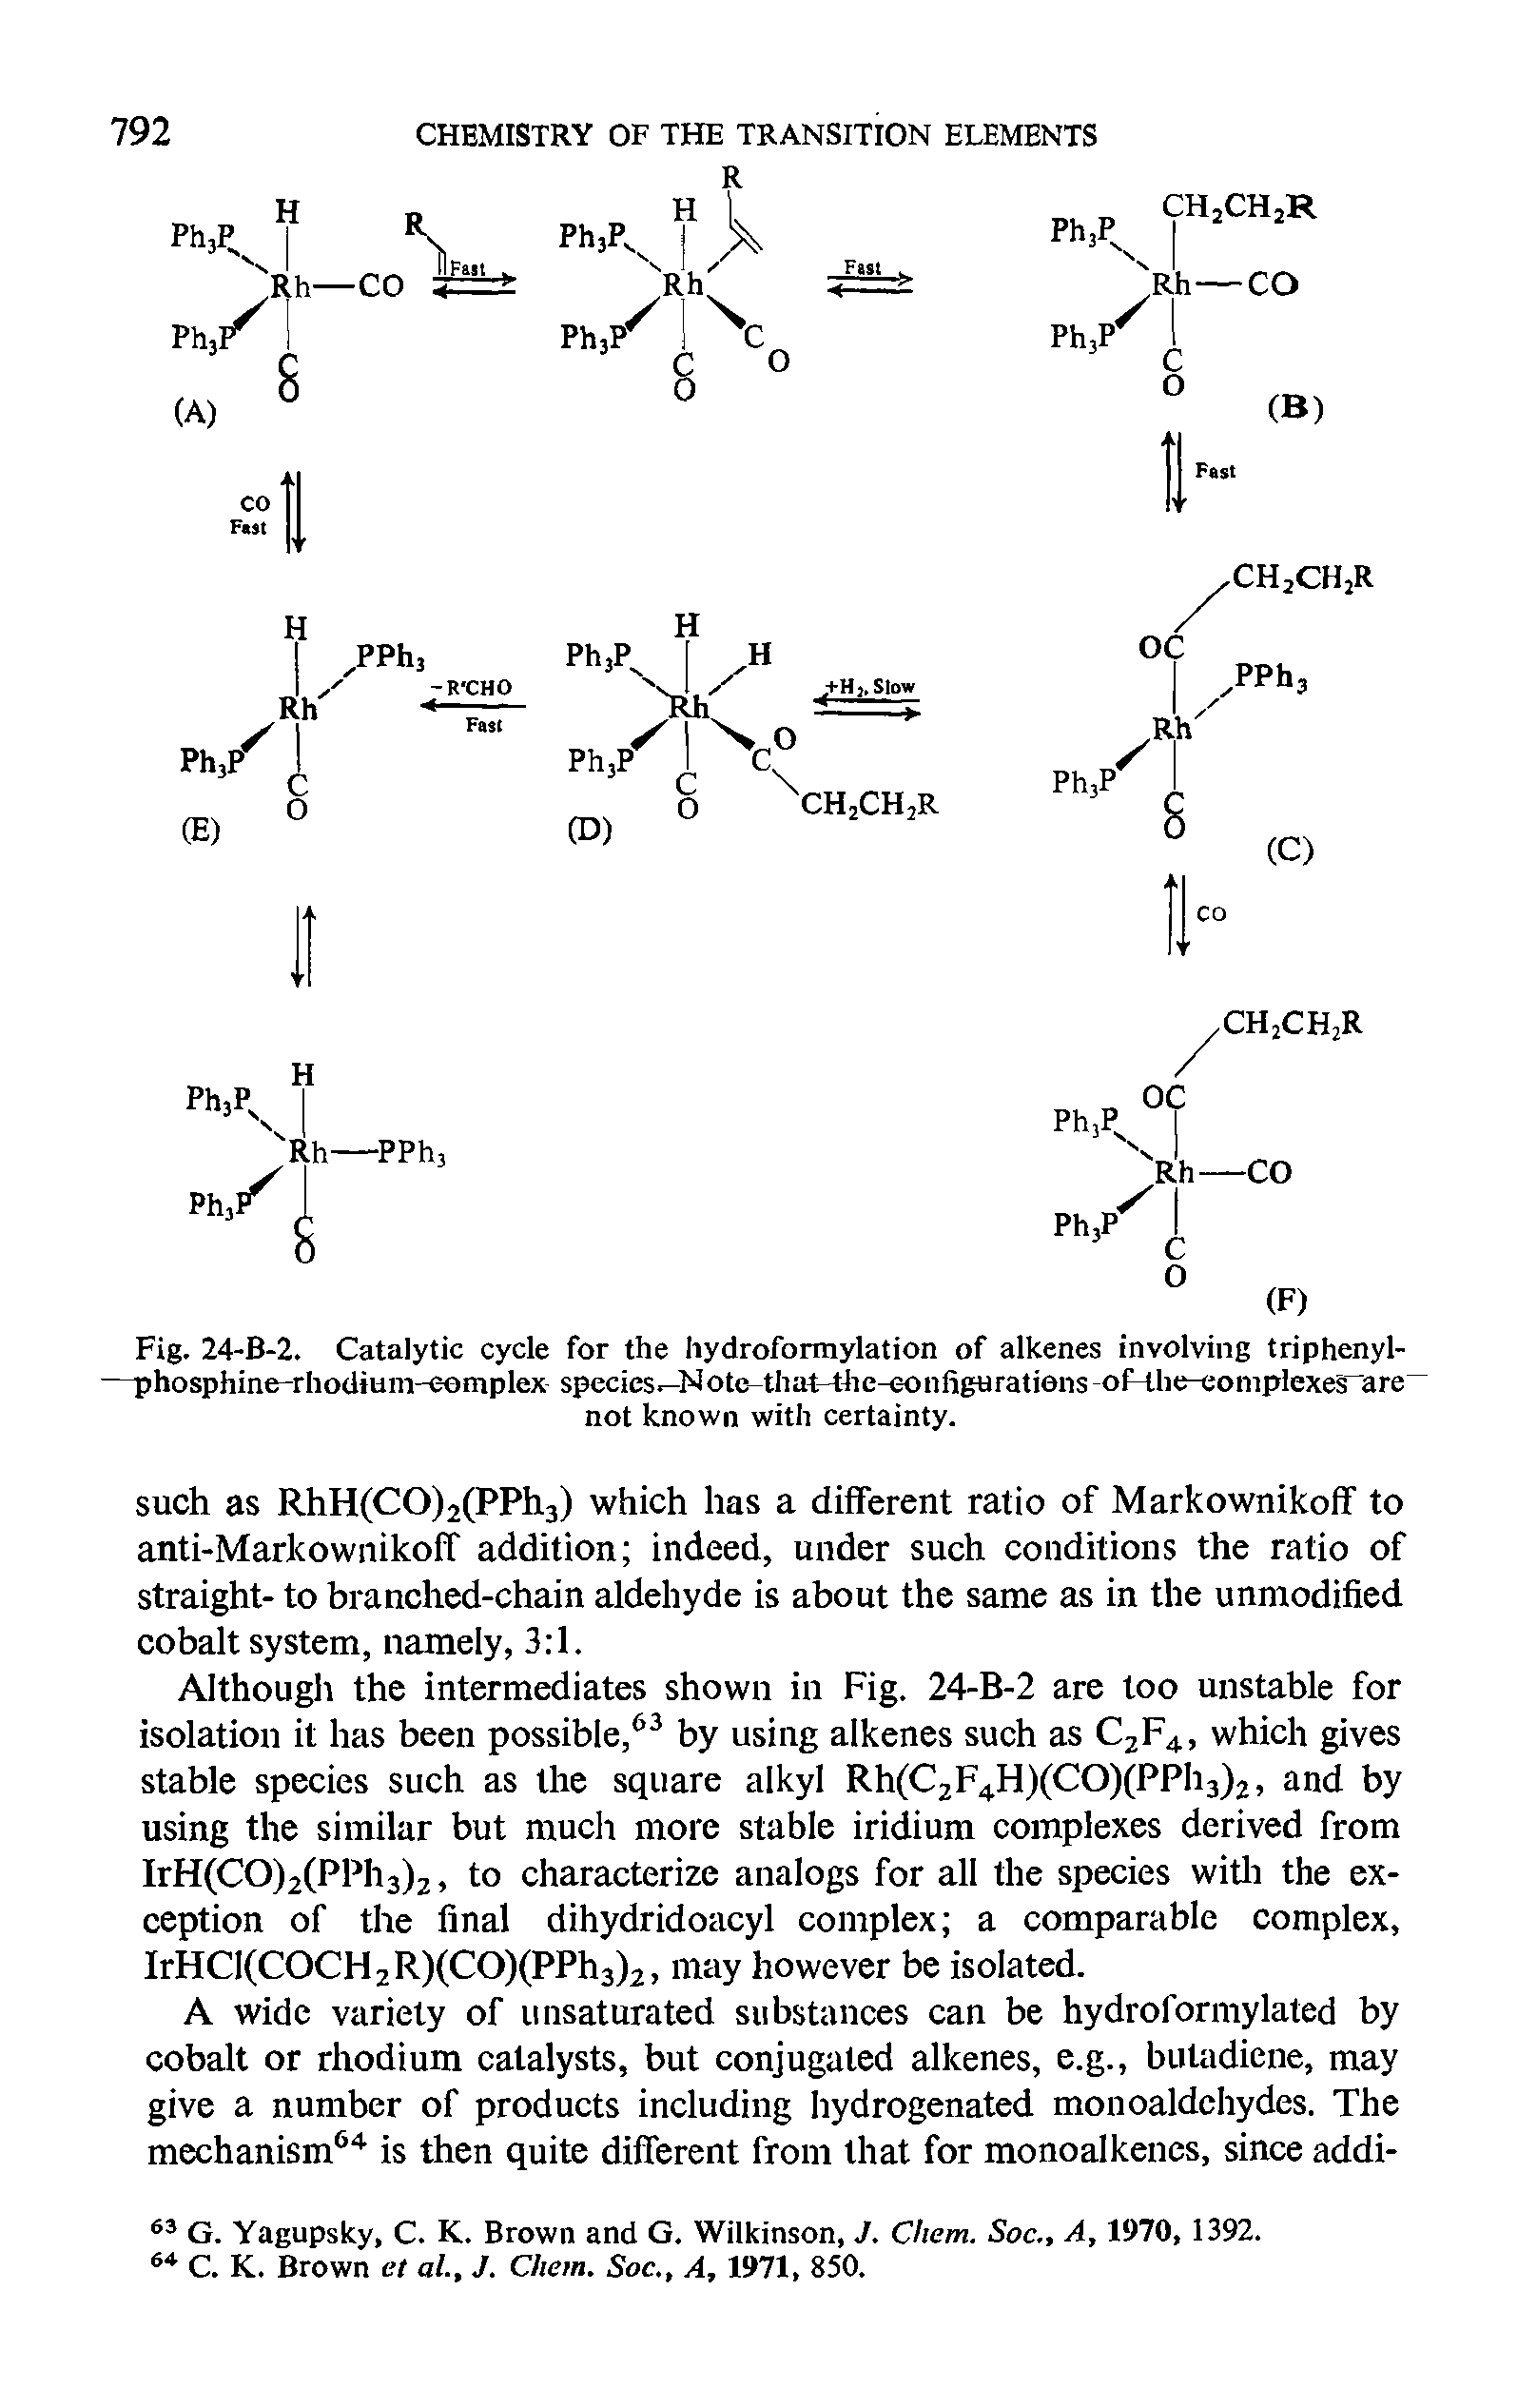 Fig. 24-B-2. Catalytic cycle for the hydroformylation of alkenes involving triphenyl-—phosphine-rhodium-complex specics -Note that the-eoniigtiratieiis of the-complexes arc...